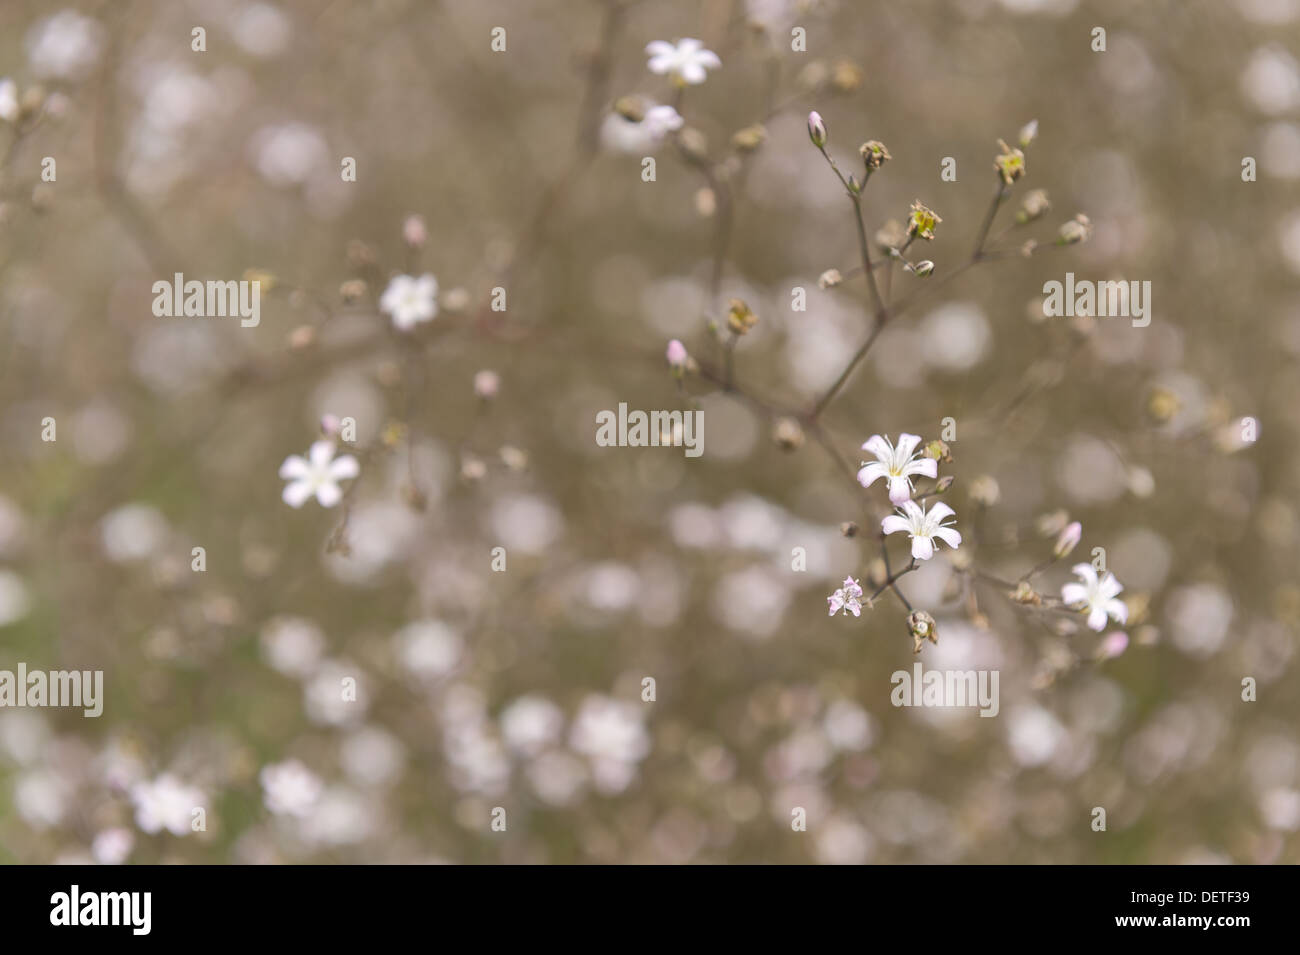 Mist of small gypsophilia flowers dispersed throughout a massive clump of flowering bloom garden bride Stock Photo